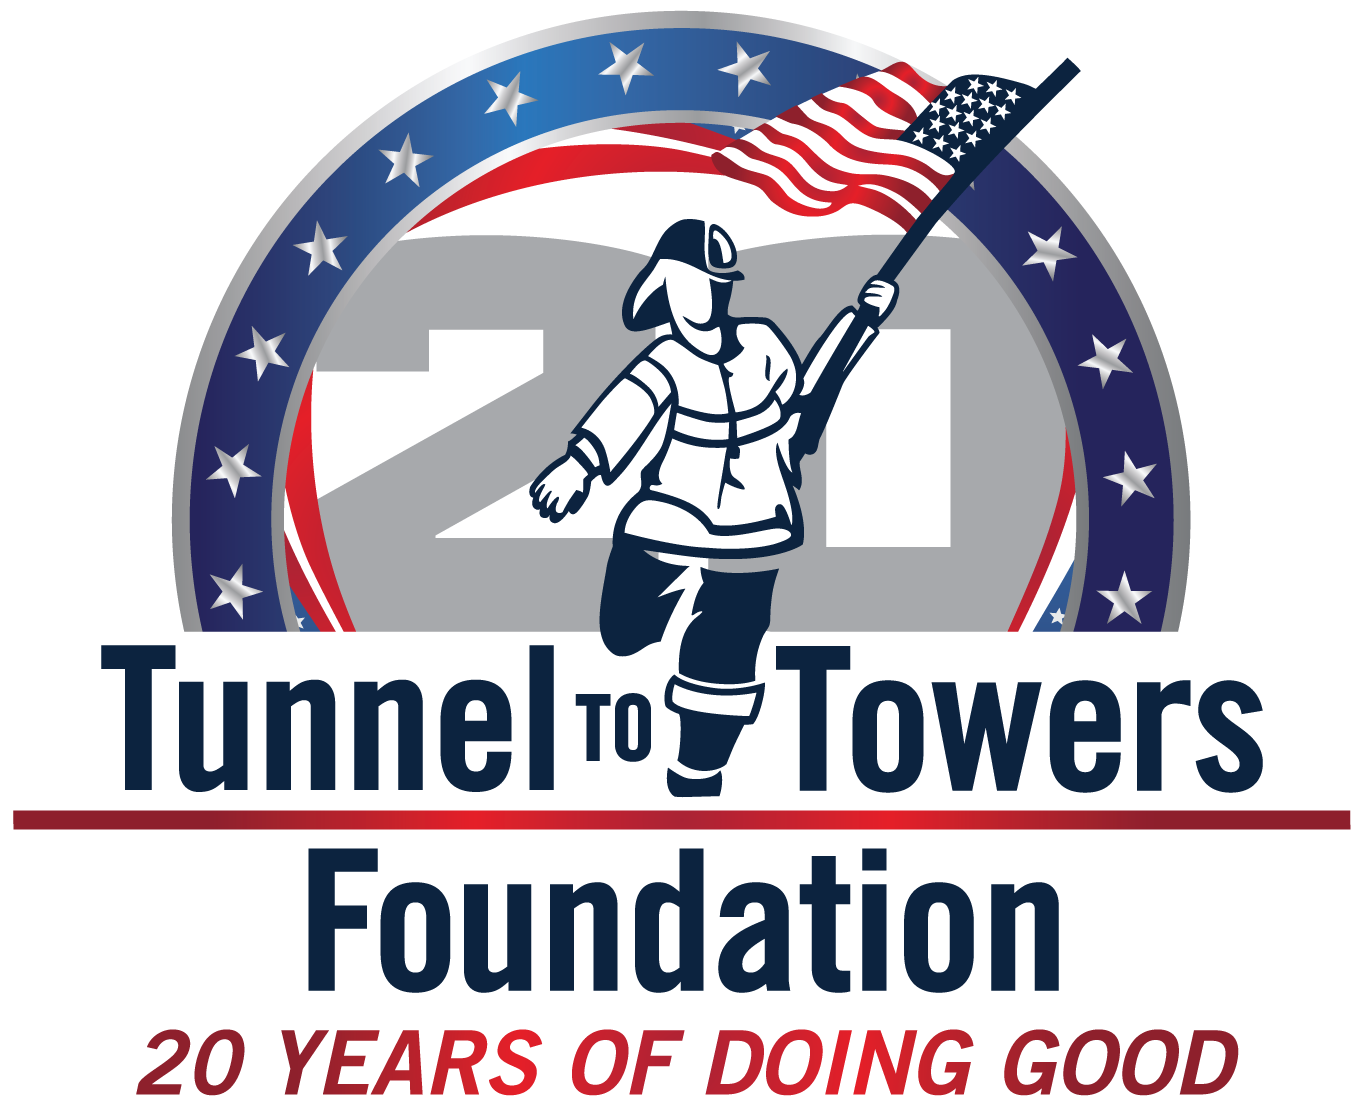 Tunnel to Towers Ral